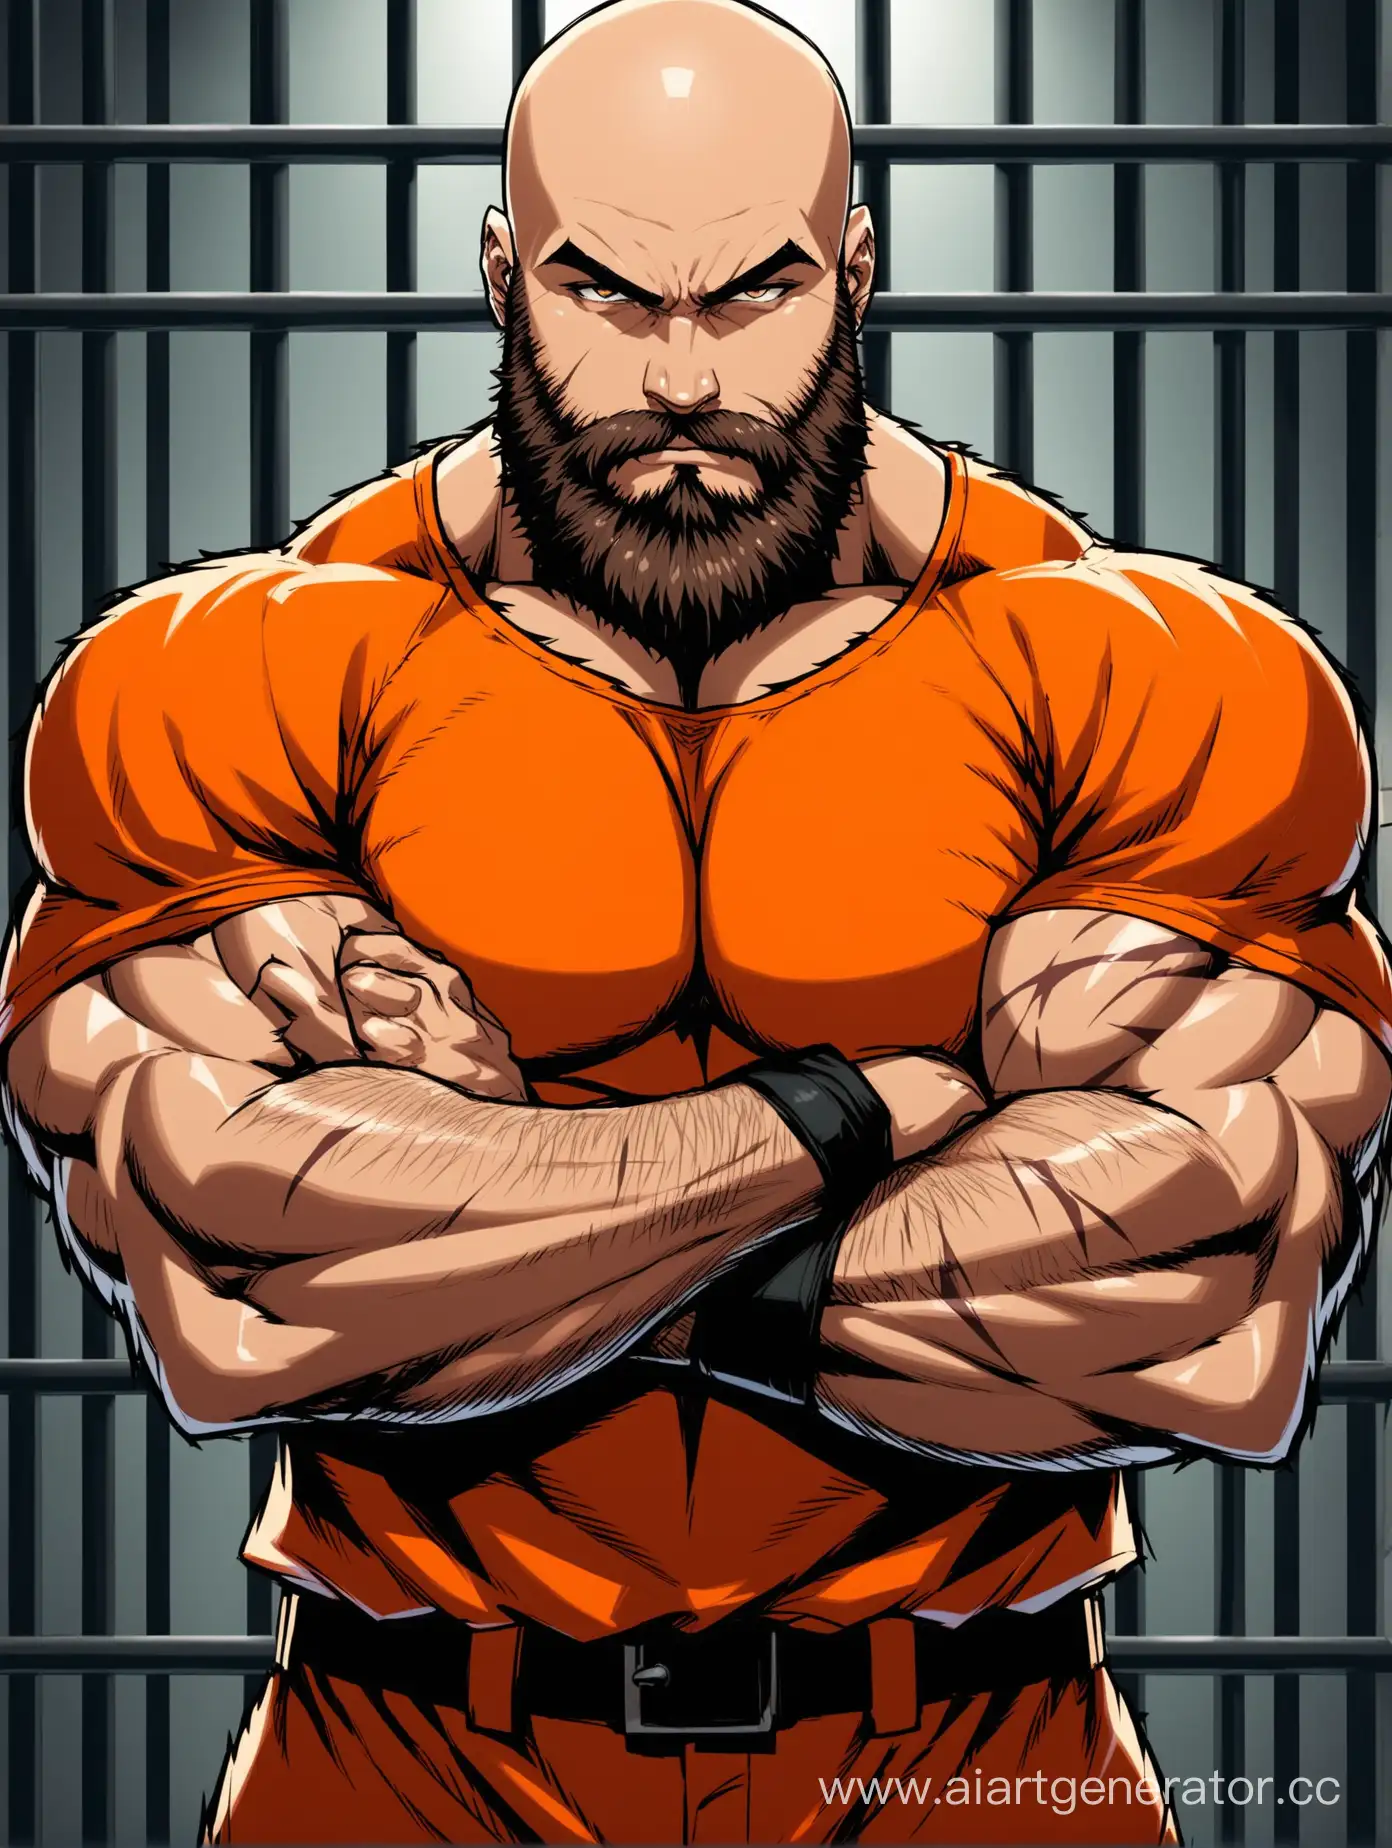 bald muscular man with a beard, brutal man, serious face, thick beard, stern look, huge muscles, crime boss, criminal, dangerous prisoner.  Dressed in an orange prison suit.  Crossed his arms.  The beard is medium length and dark chestnut in color, the eyes are gray.  Scar on the face crossing the eyebrow